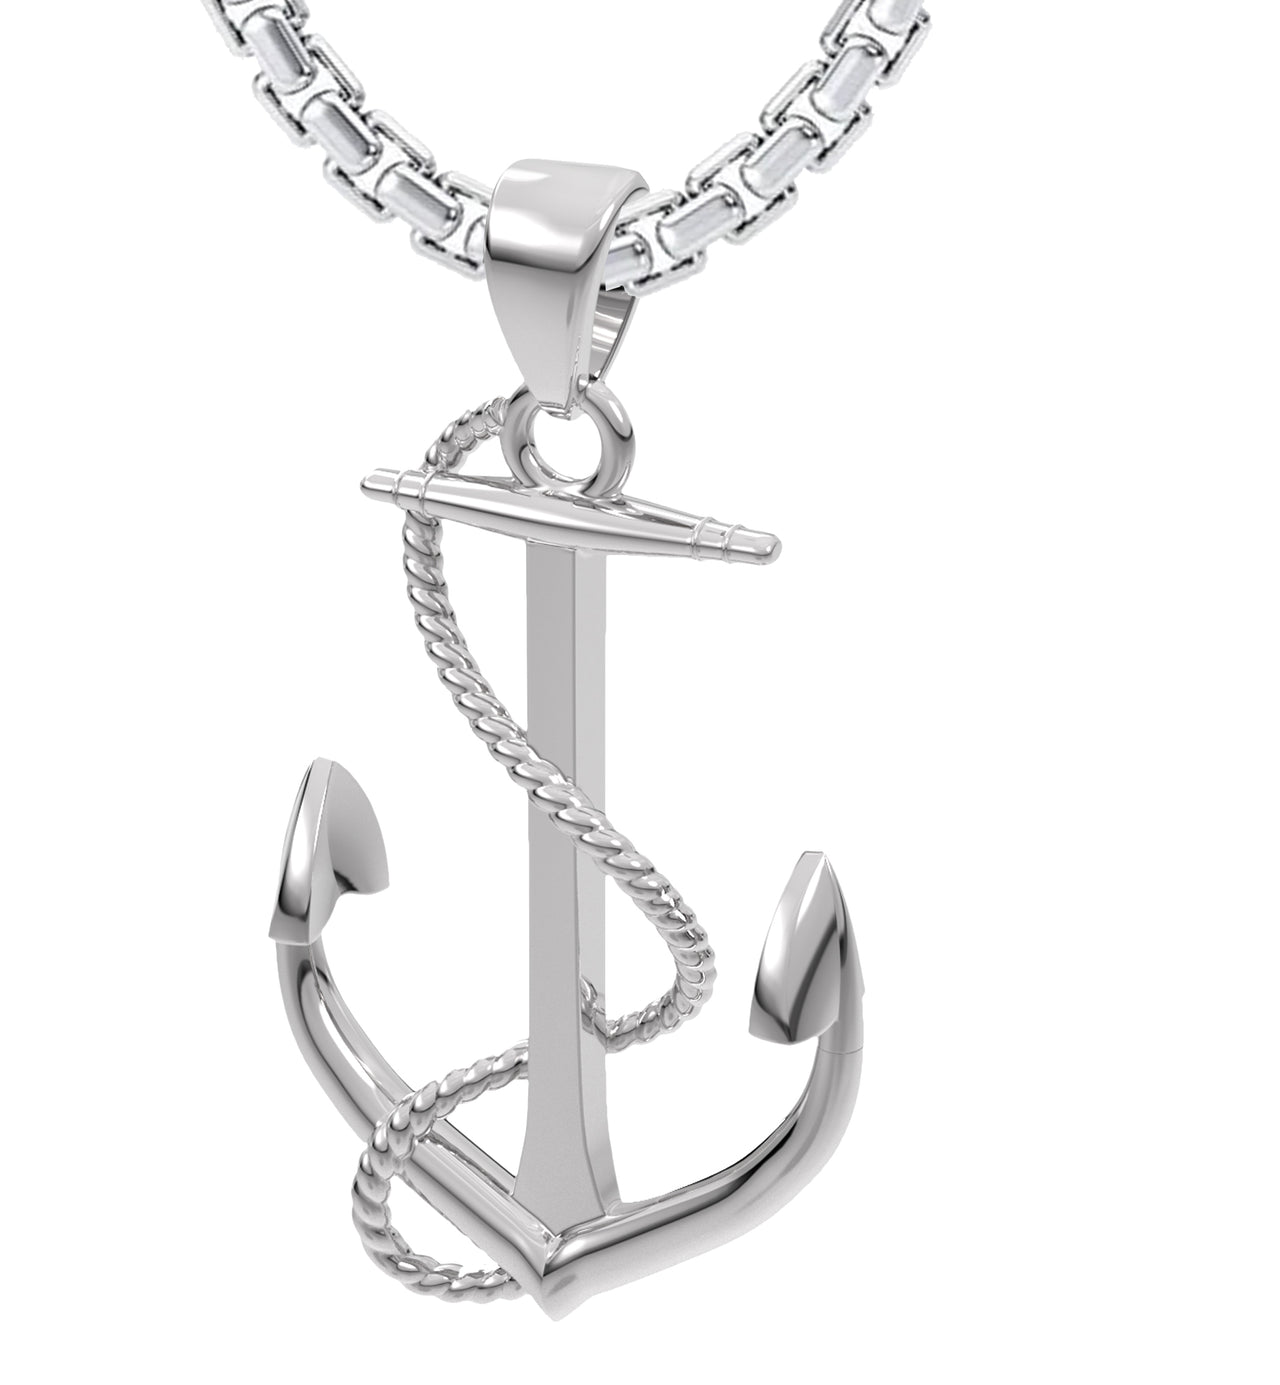 Men's XL Extra Large 925 Sterling Silver High Polished Nautical Anchor Pendant Necklace, 50mm